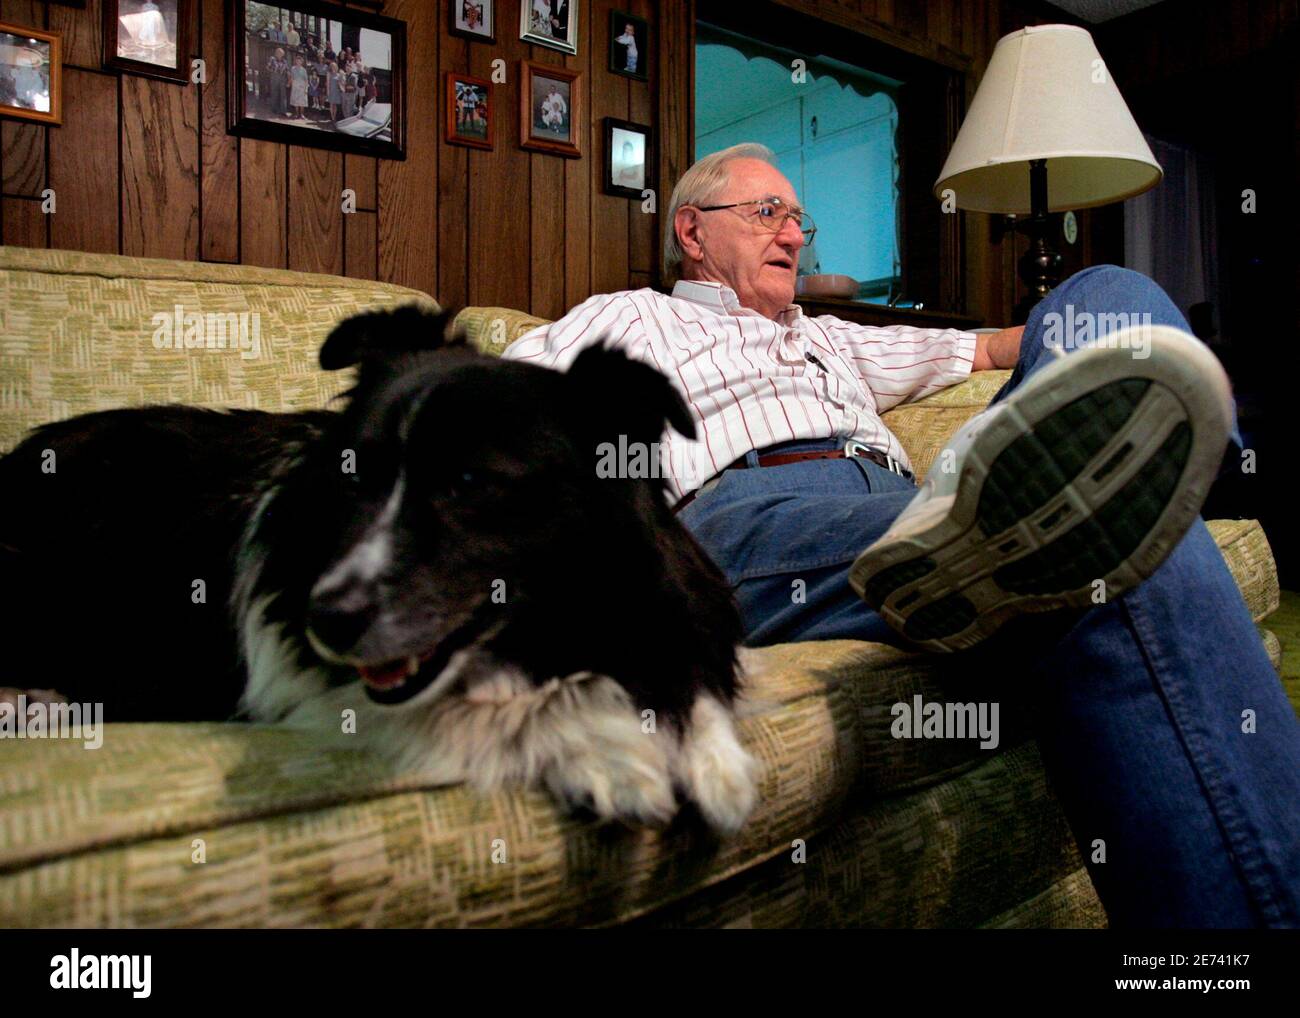 George Thomas Jones, a former businessman who now writes about local history, reminisces about author Harper Lee as he is pictured in Monroeville, Alabama with his dog Sissy in this May 17, 2007 file photo. Thousands of tourists come each spring to watch a stage adaptation of the book 'To Kill A Mockingbird' performed by unpaid local actors at old courthouse. When Lee wrote 'To Kill A Mockingbird', a novel about racial injustice in a southern town, she could not have known it would be hailed as a classic and enable her home town to learn from its own history. Historians have discovered that Le Stock Photo